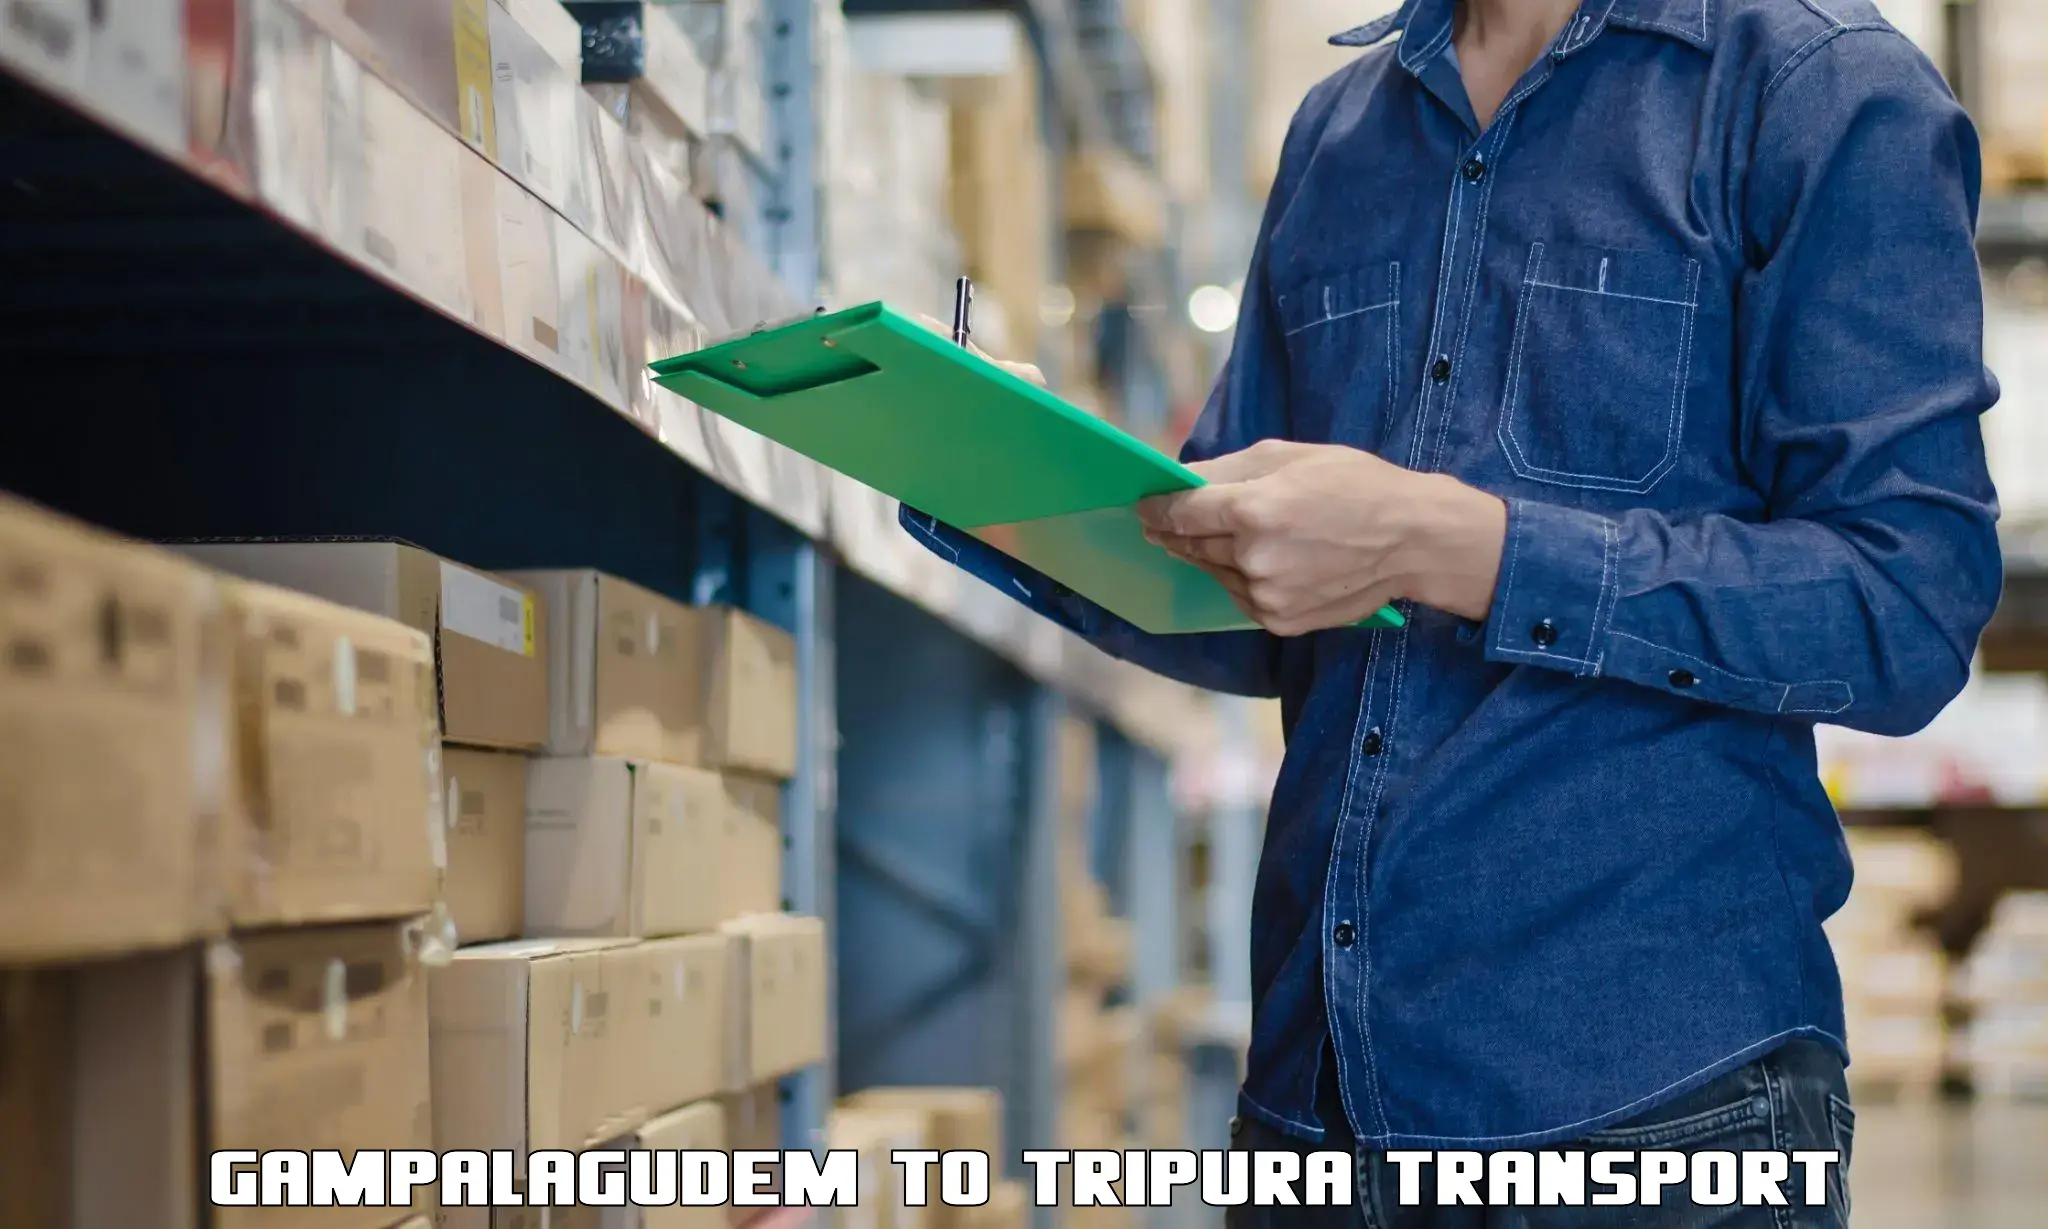 Part load transport service in India Gampalagudem to Tripura